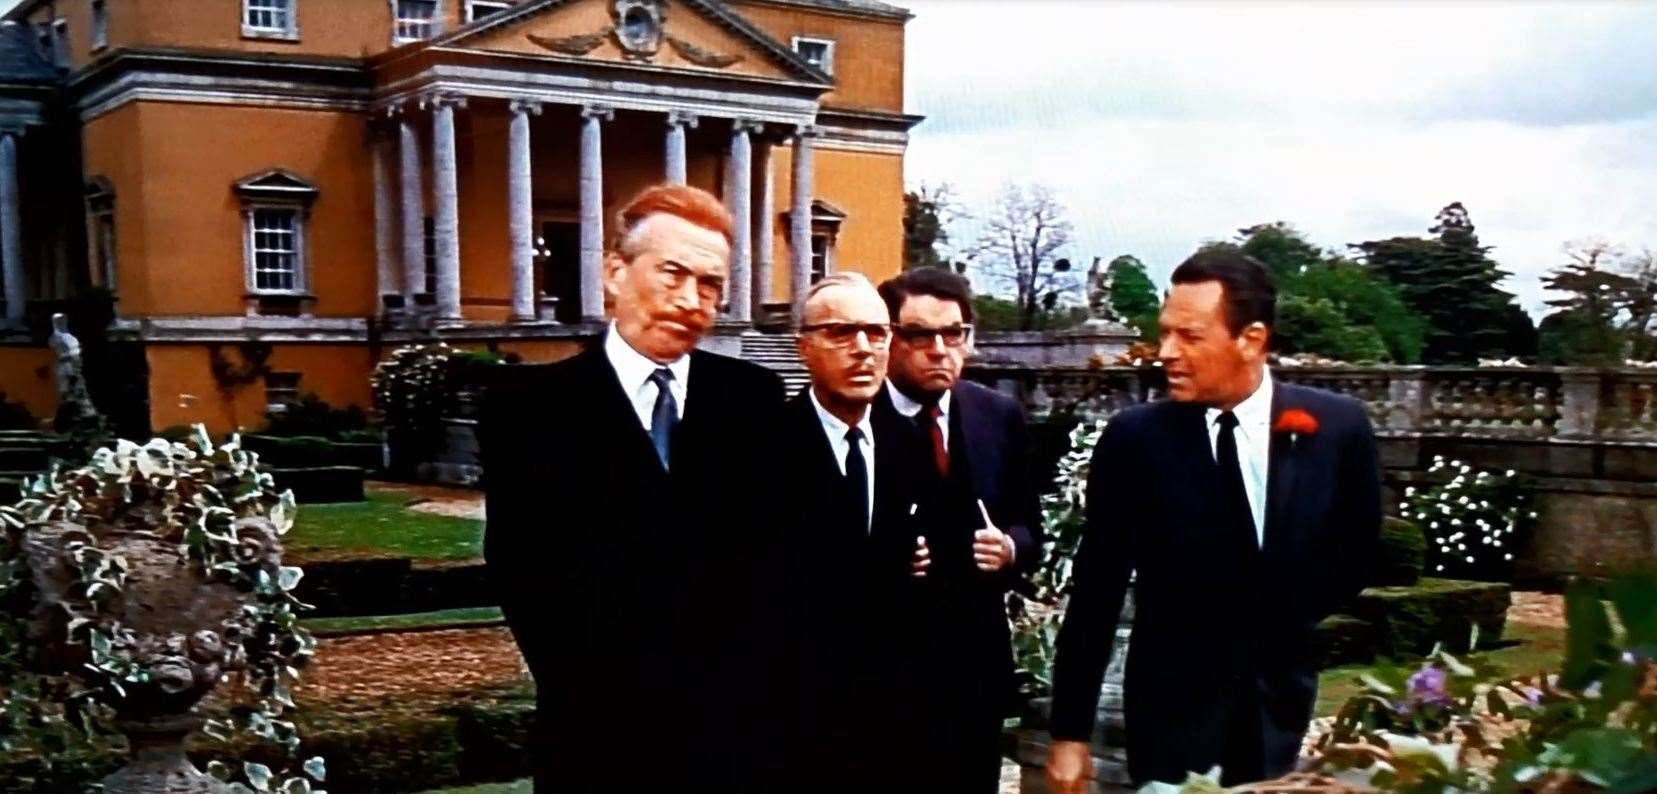 The heads of the Secret Service agencies played by John Huston, Charles Boyer, Kurt Kasznar and William Holden gather at Mereworth Castle